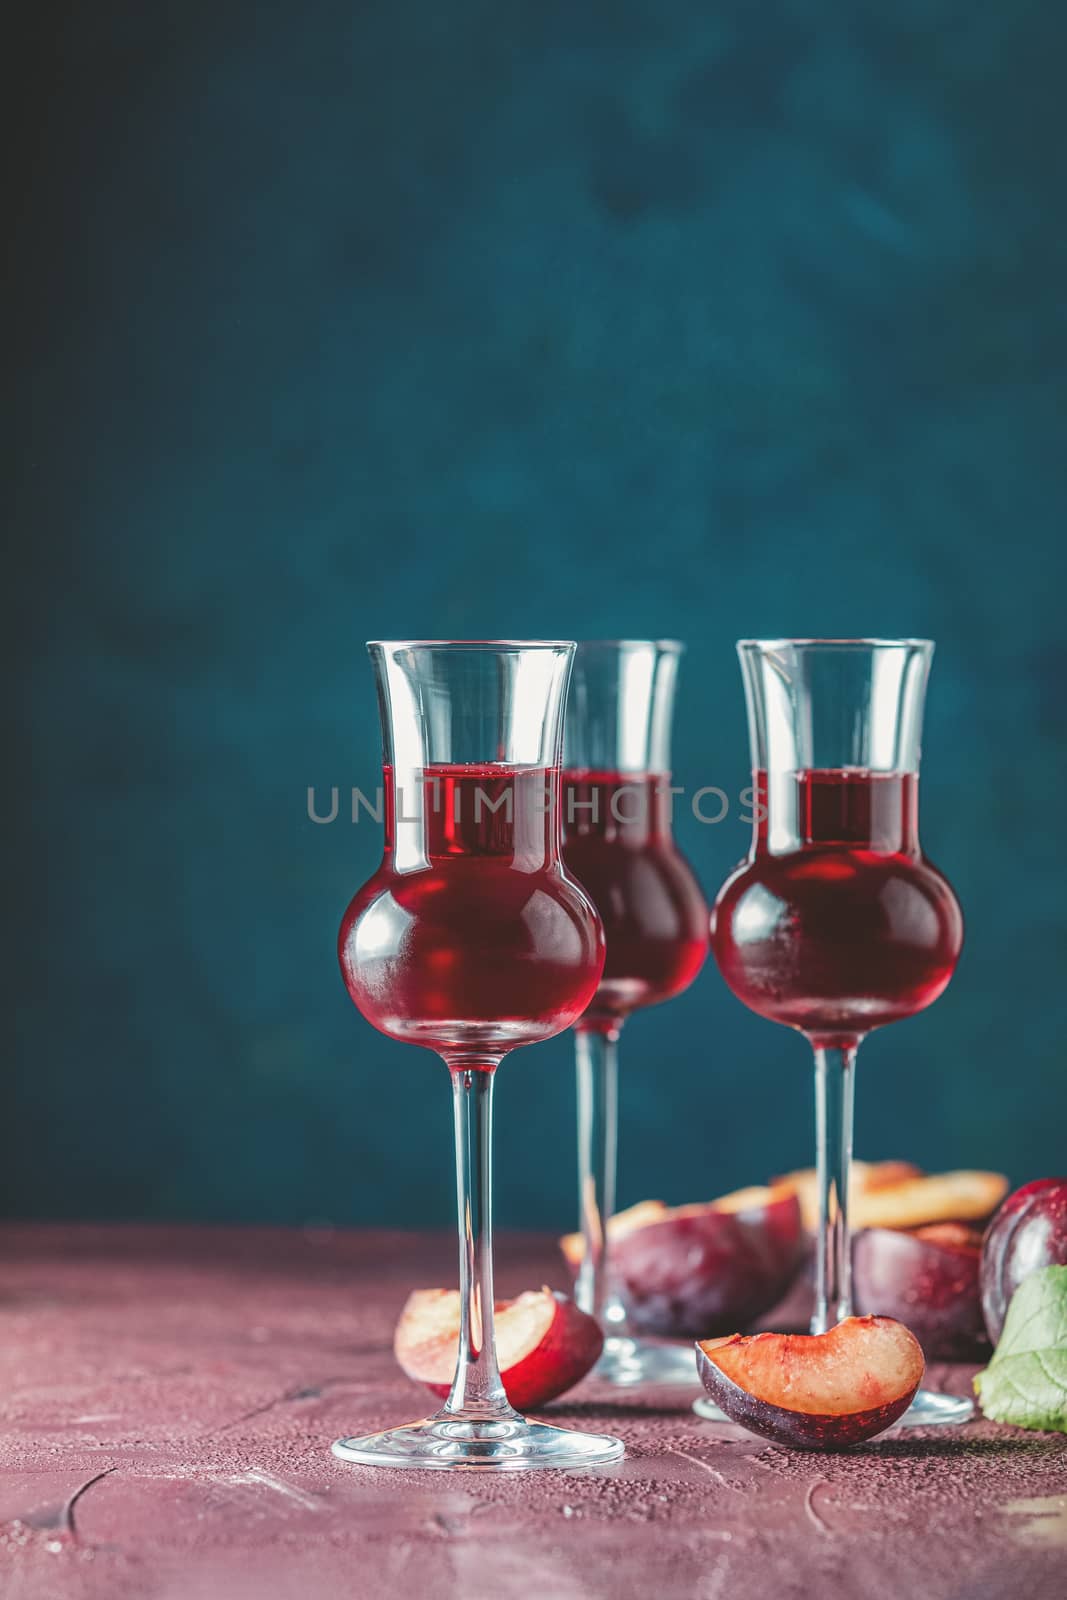 Plums strong alcoholic drink in grappas wineglass with dew. Hard liquor, slivovica, plum brandy or plum vodka with ripe plums on dark blue and  claret bordeaux concrete surface.